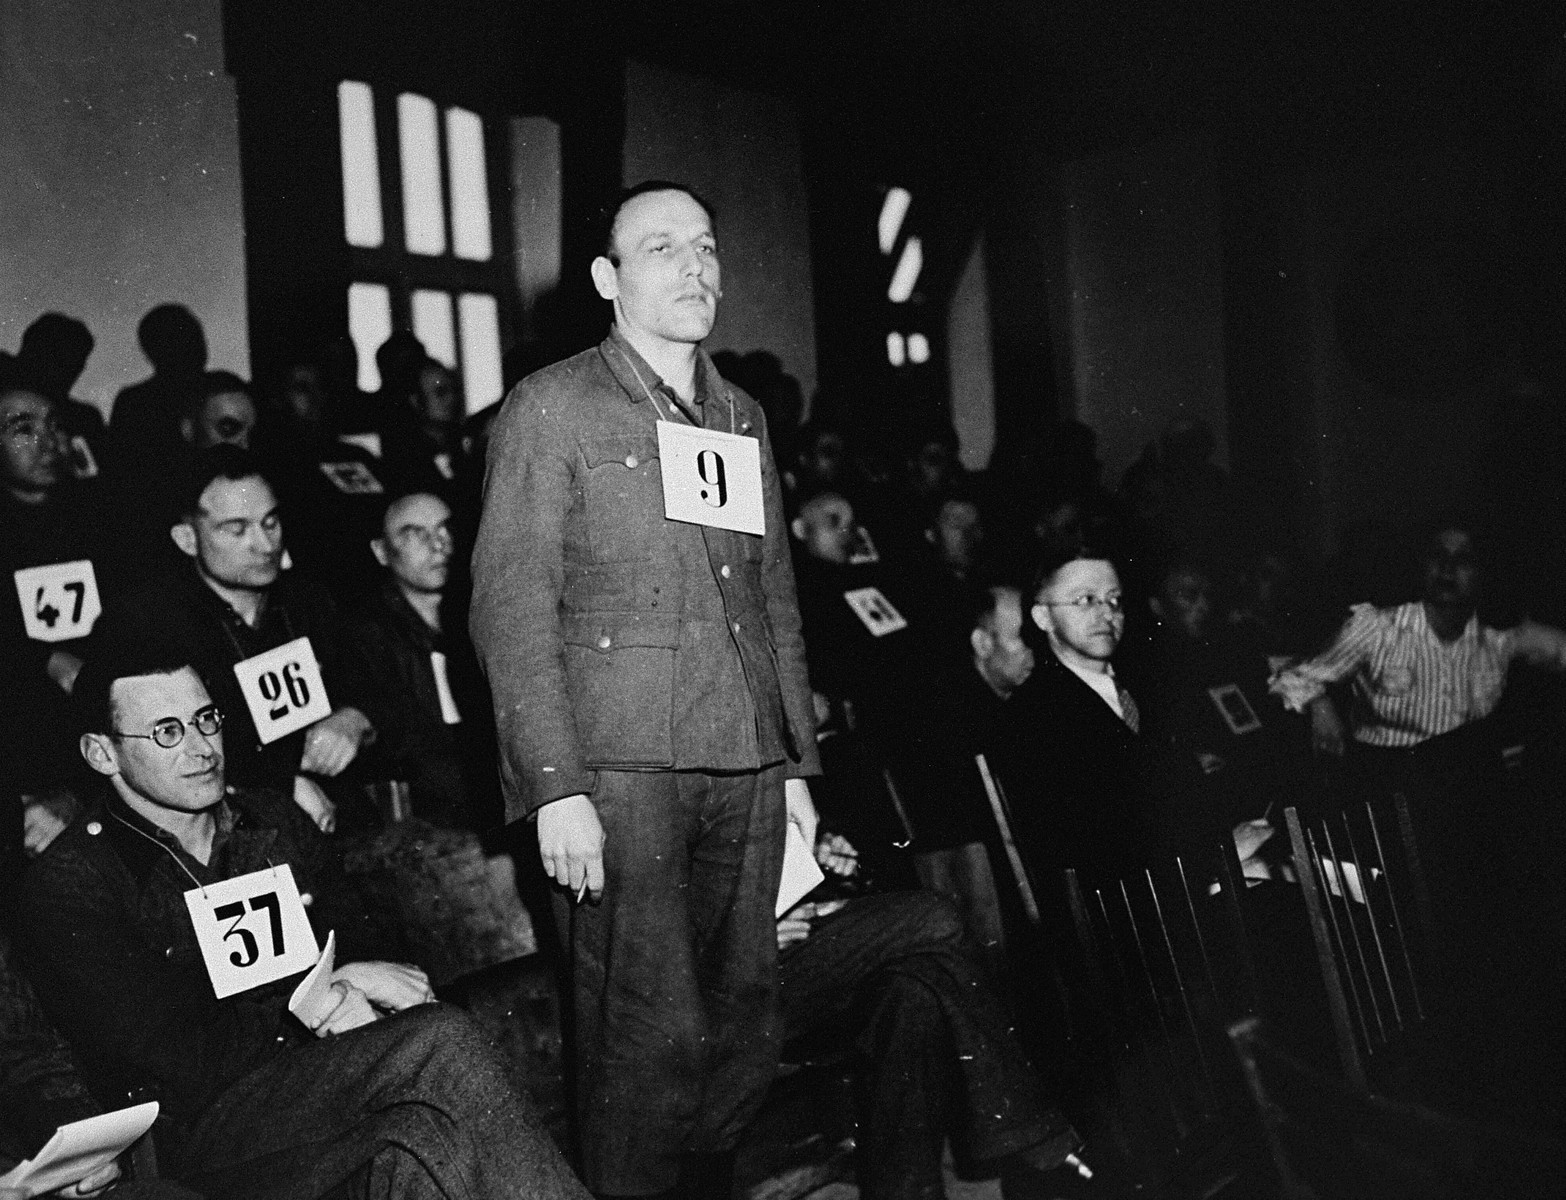 Former SS-Unterscharfuehrer Hans Diehl, a defendant at the trial of 61 former camp personnel and prisoners from Mauthausen, stands in his place in the defendants' dock.  

Diehl was convicted and sentenced to death on May 13, 1946.